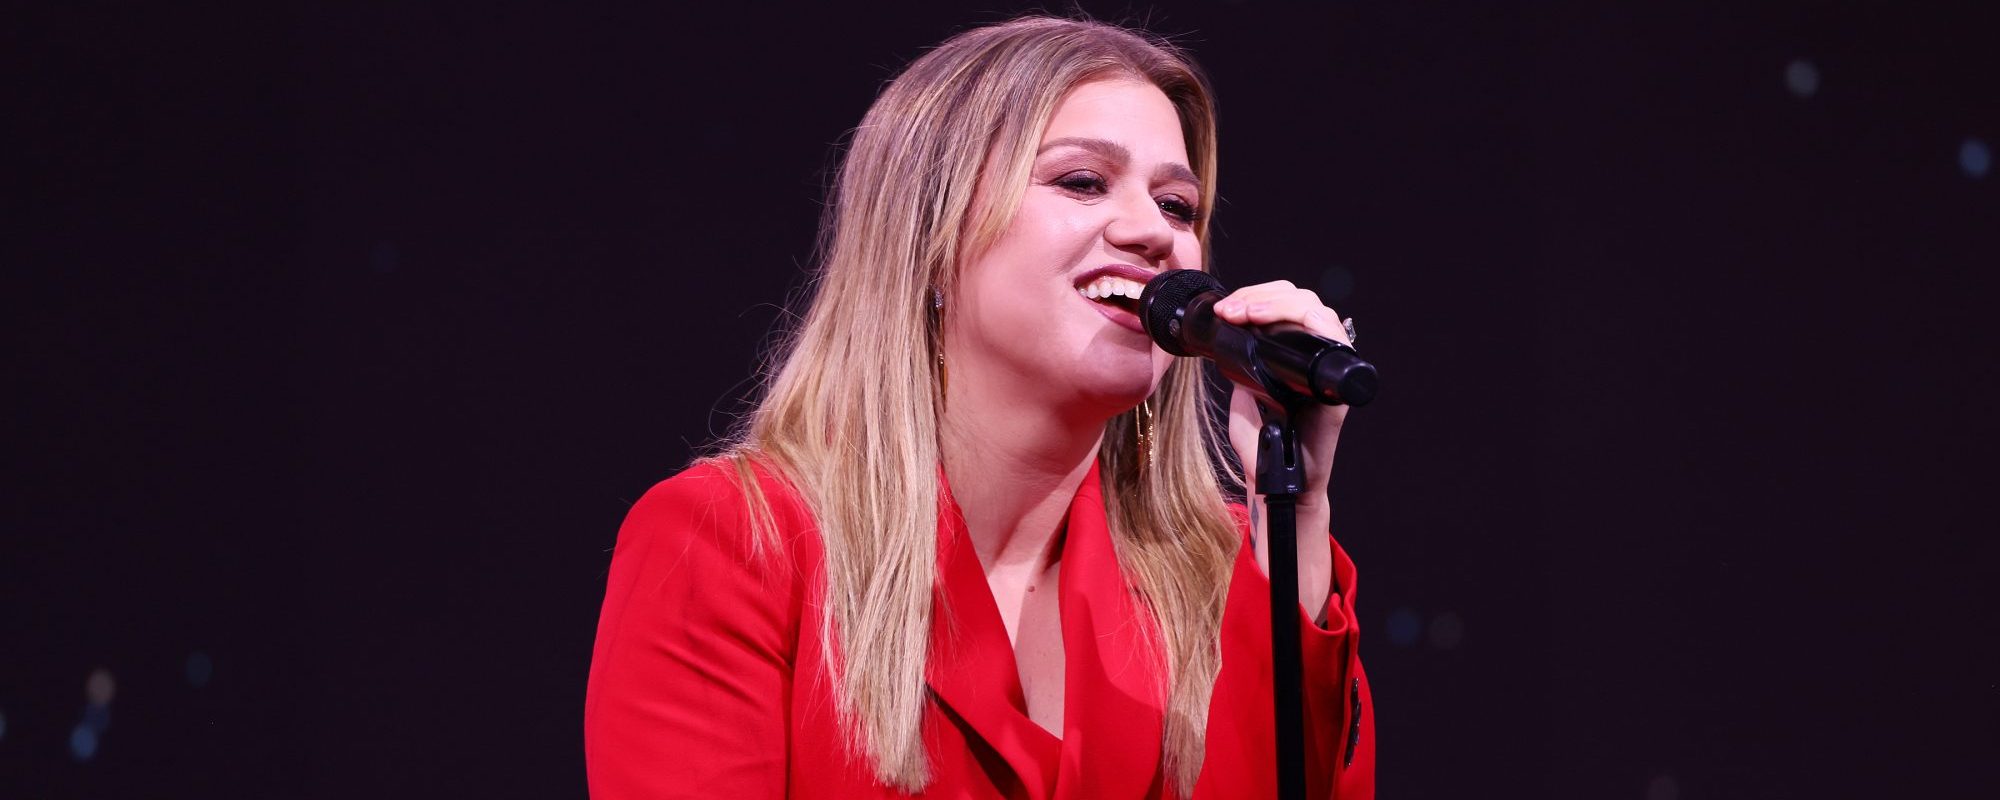 Watch: Kelly Clarkson Gets a Kick Out of Frank Sinatra During Kellyoke